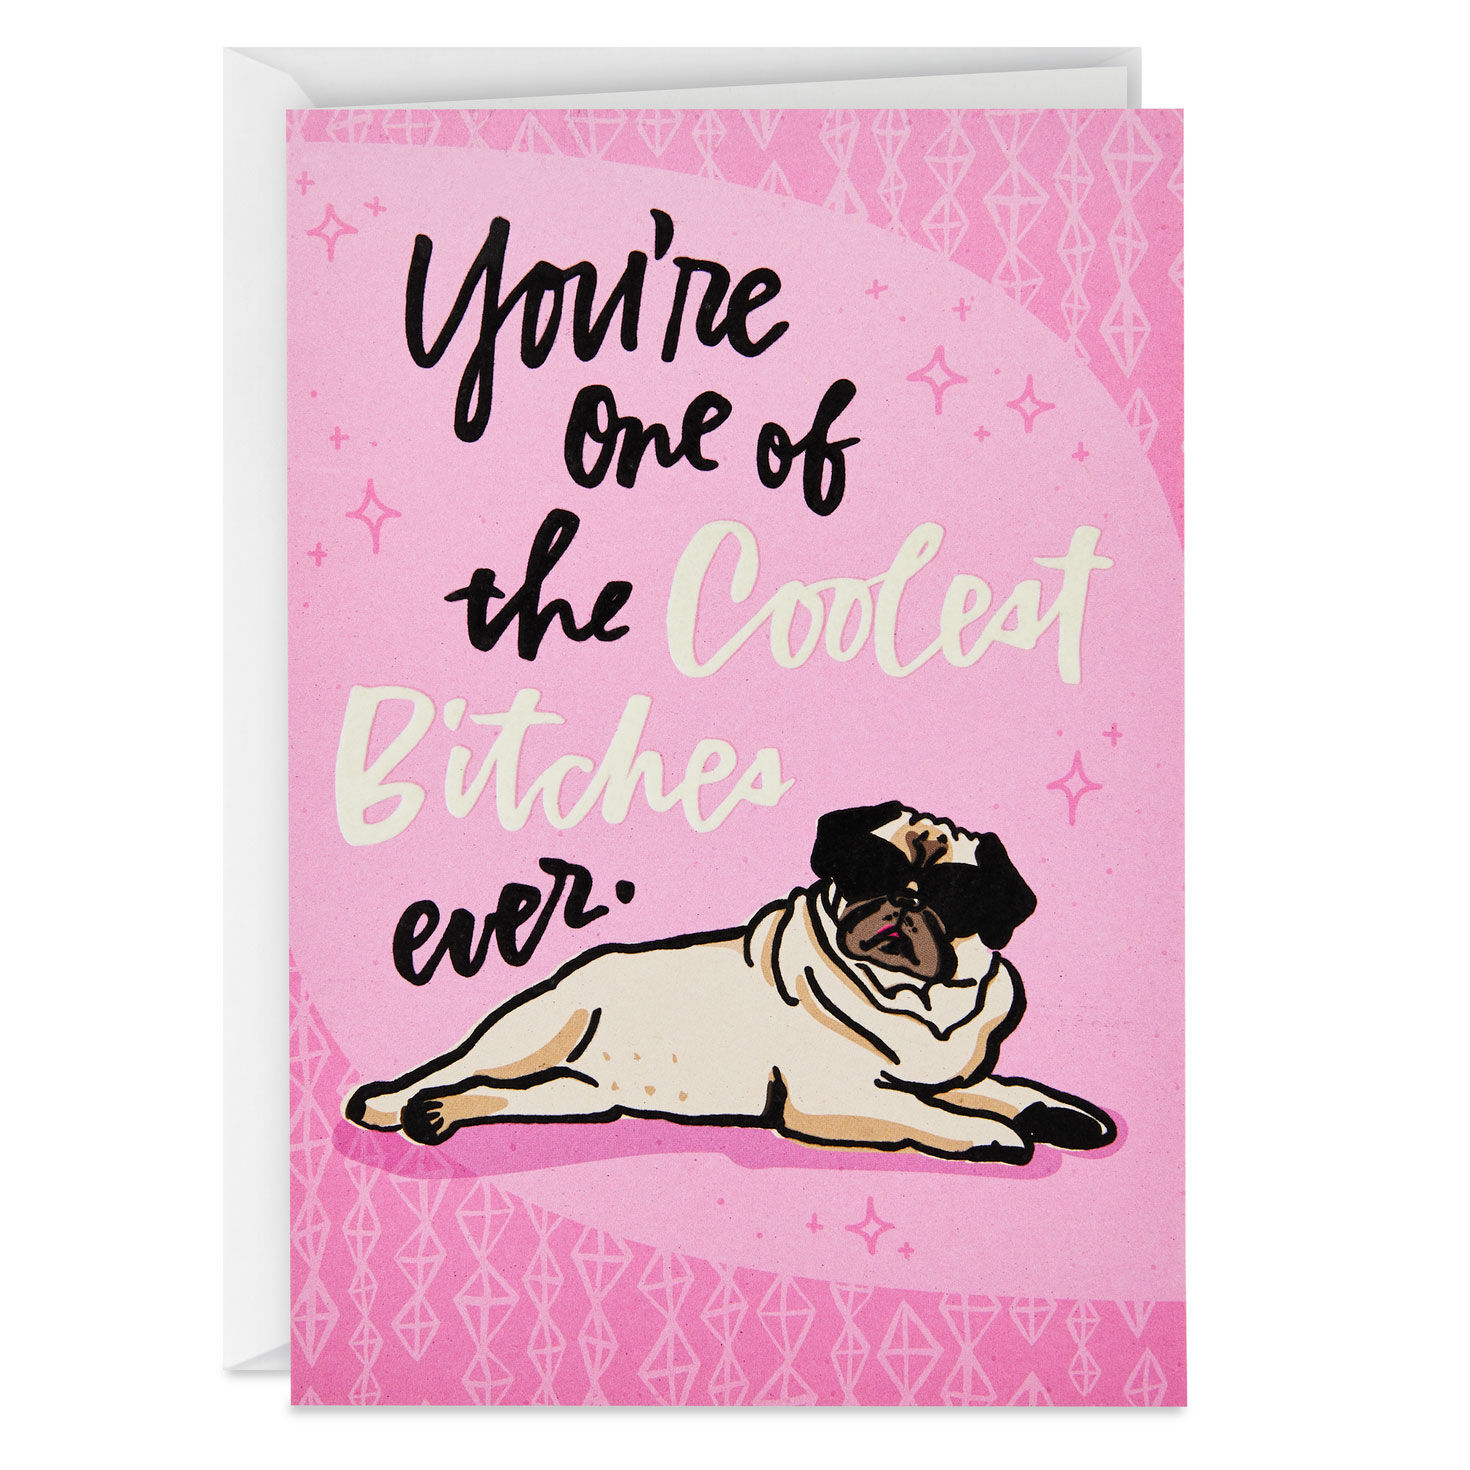 One of the Coolest Bitches Ever Funny Birthday Card for only USD 4.49 | Hallmark